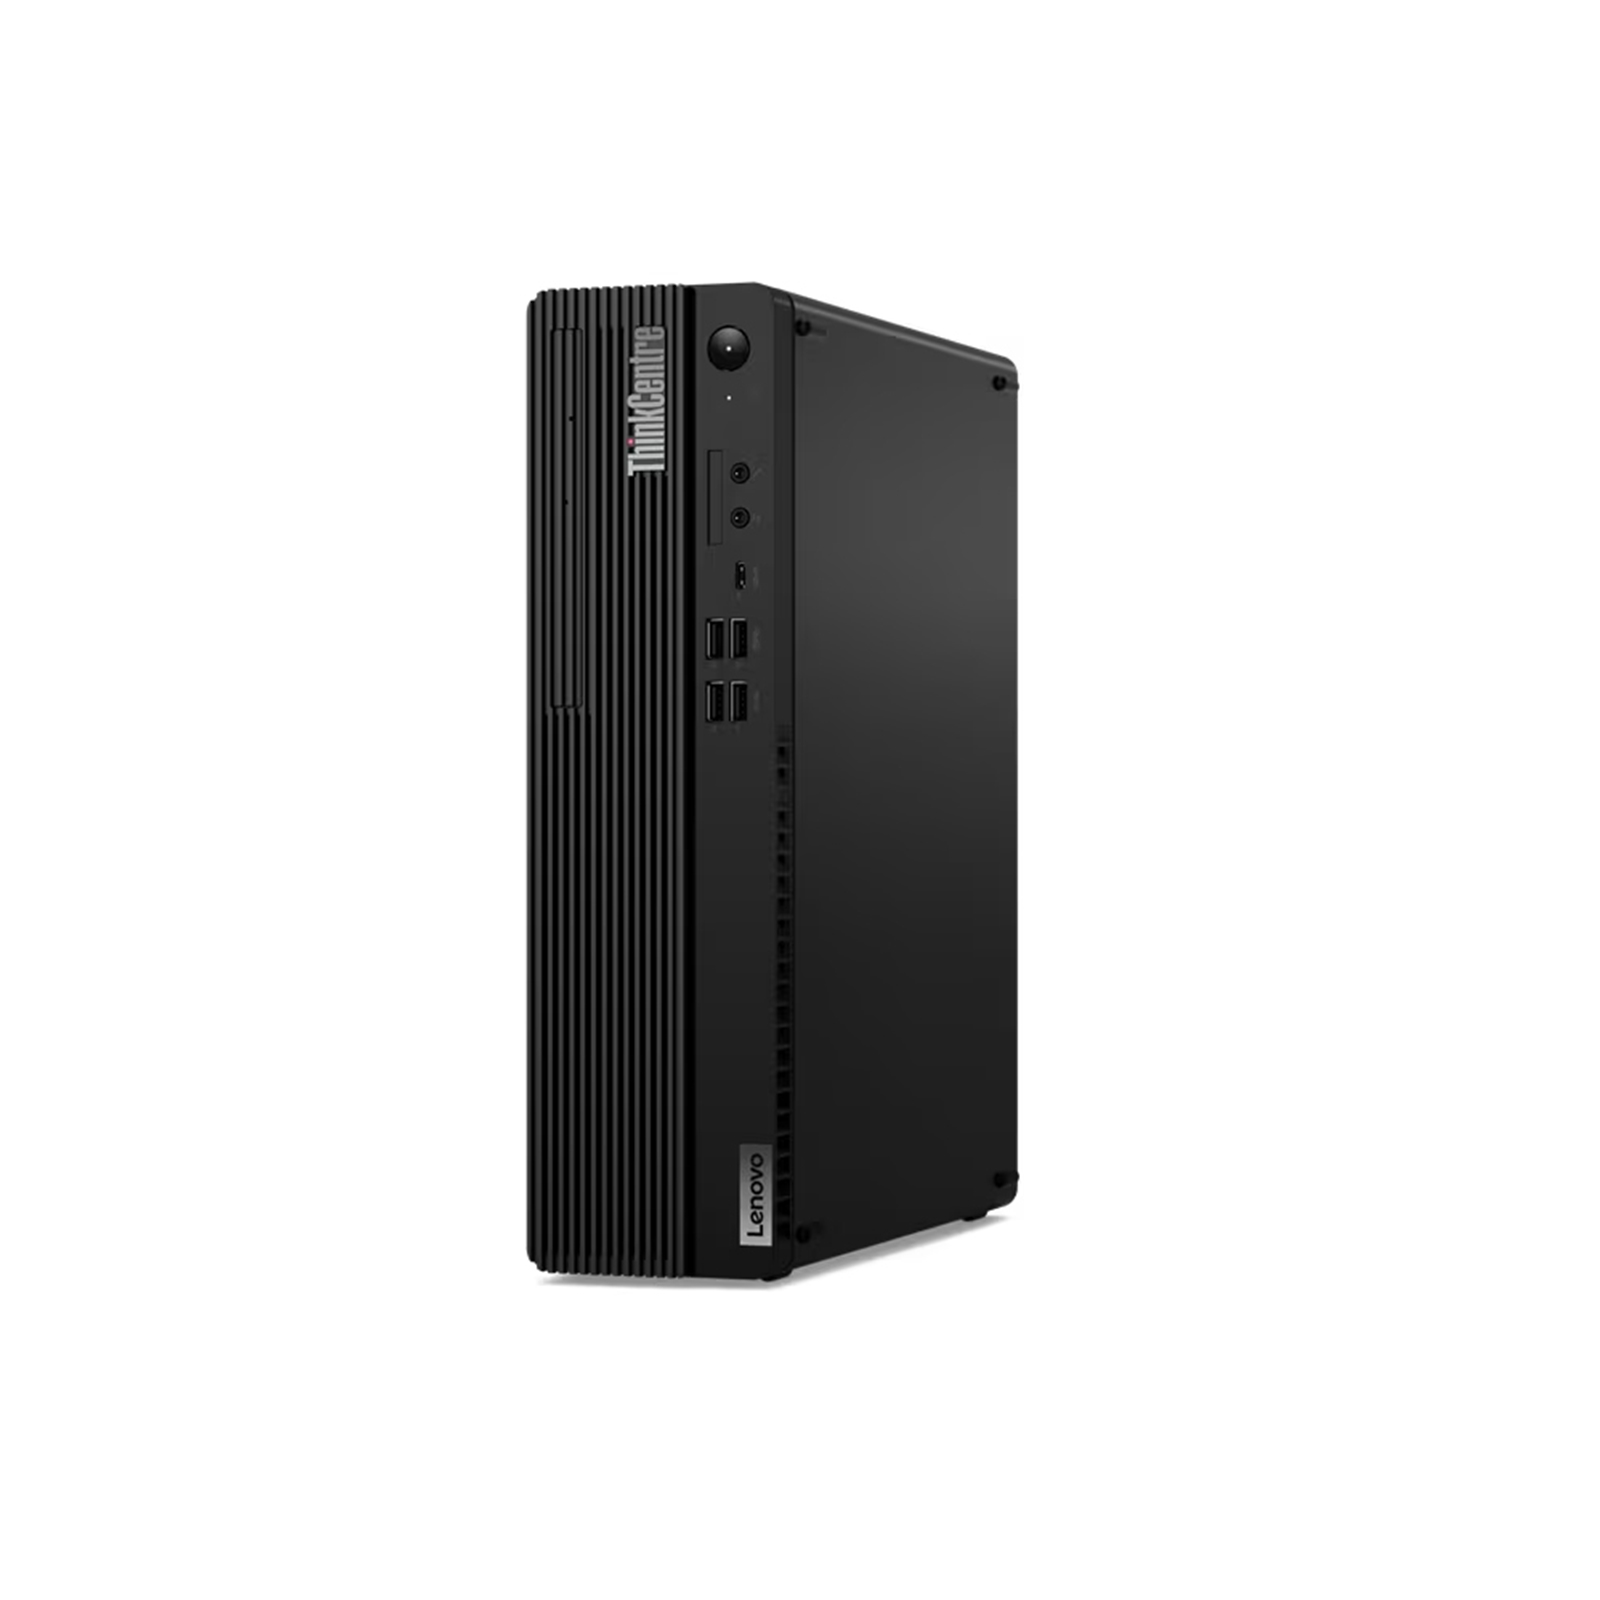 Lenovo ThinkCentre M90s 11D10042UK Small Form Factor PC, Intel Core i5-10500 vPro, 8GB RAM, 256GB SSD, Windows 10 Pro with Keyboard and Mouse